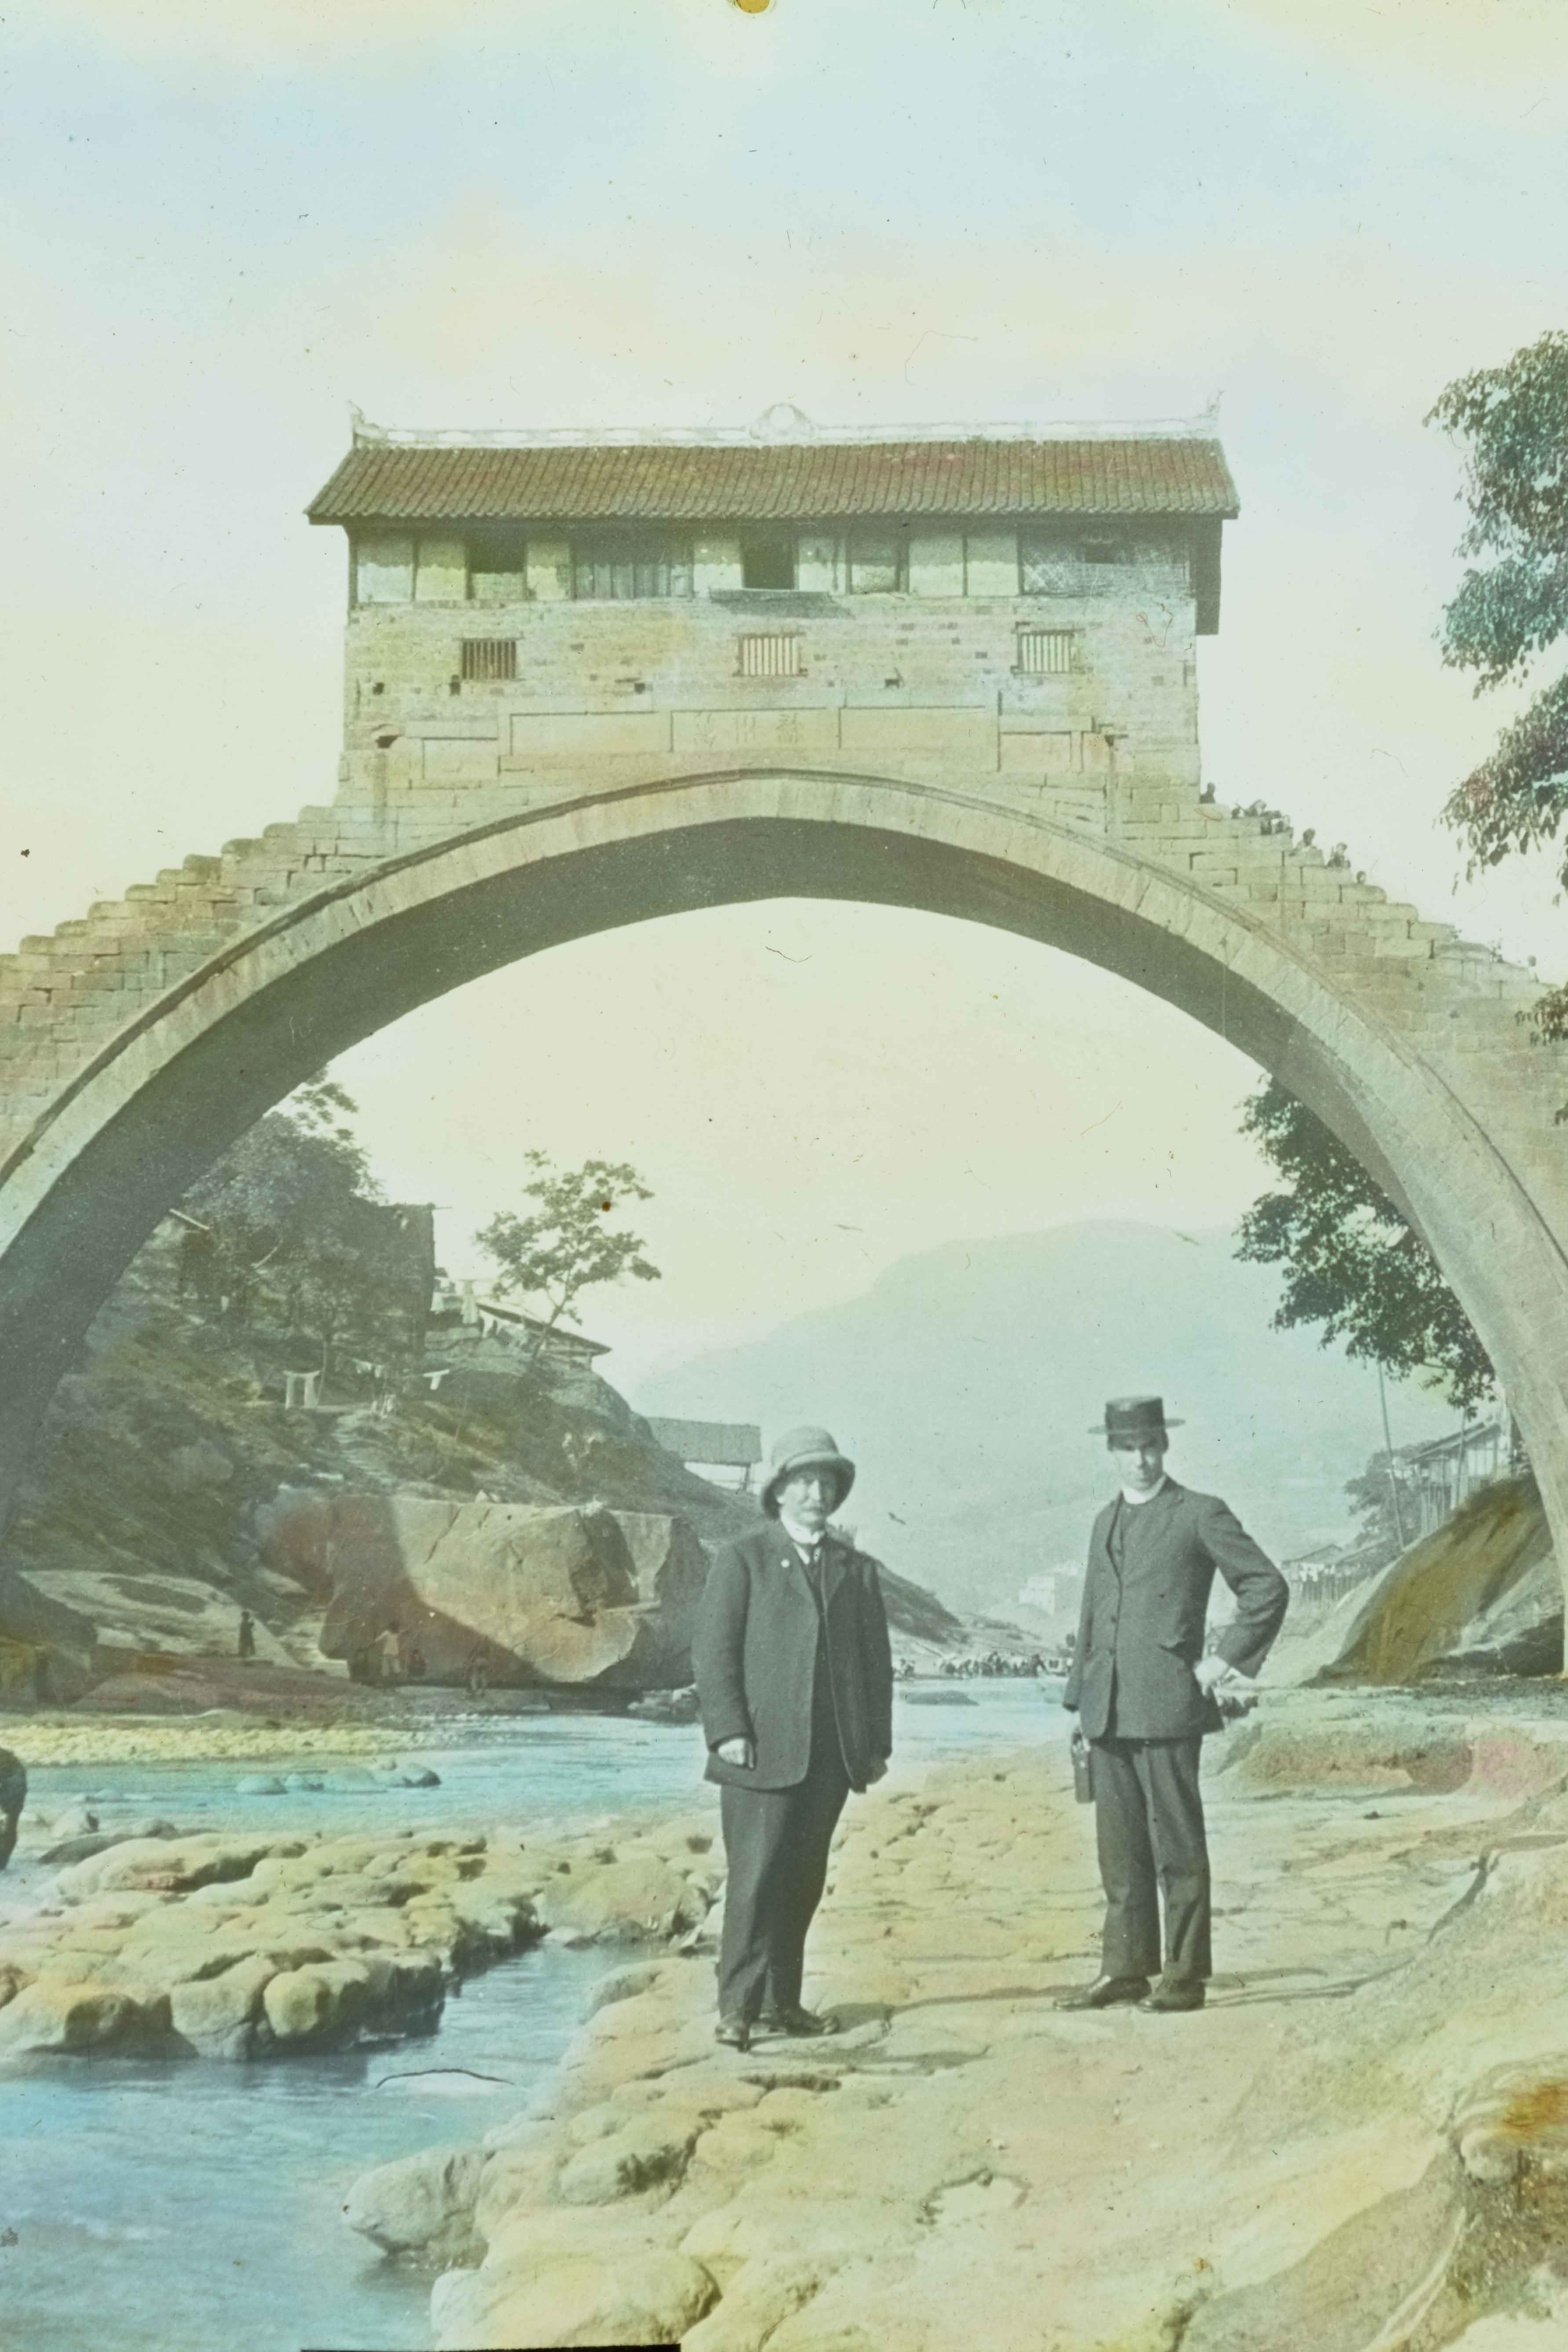 Two men standing in front of stone arch carring building bridge, possibly Asia